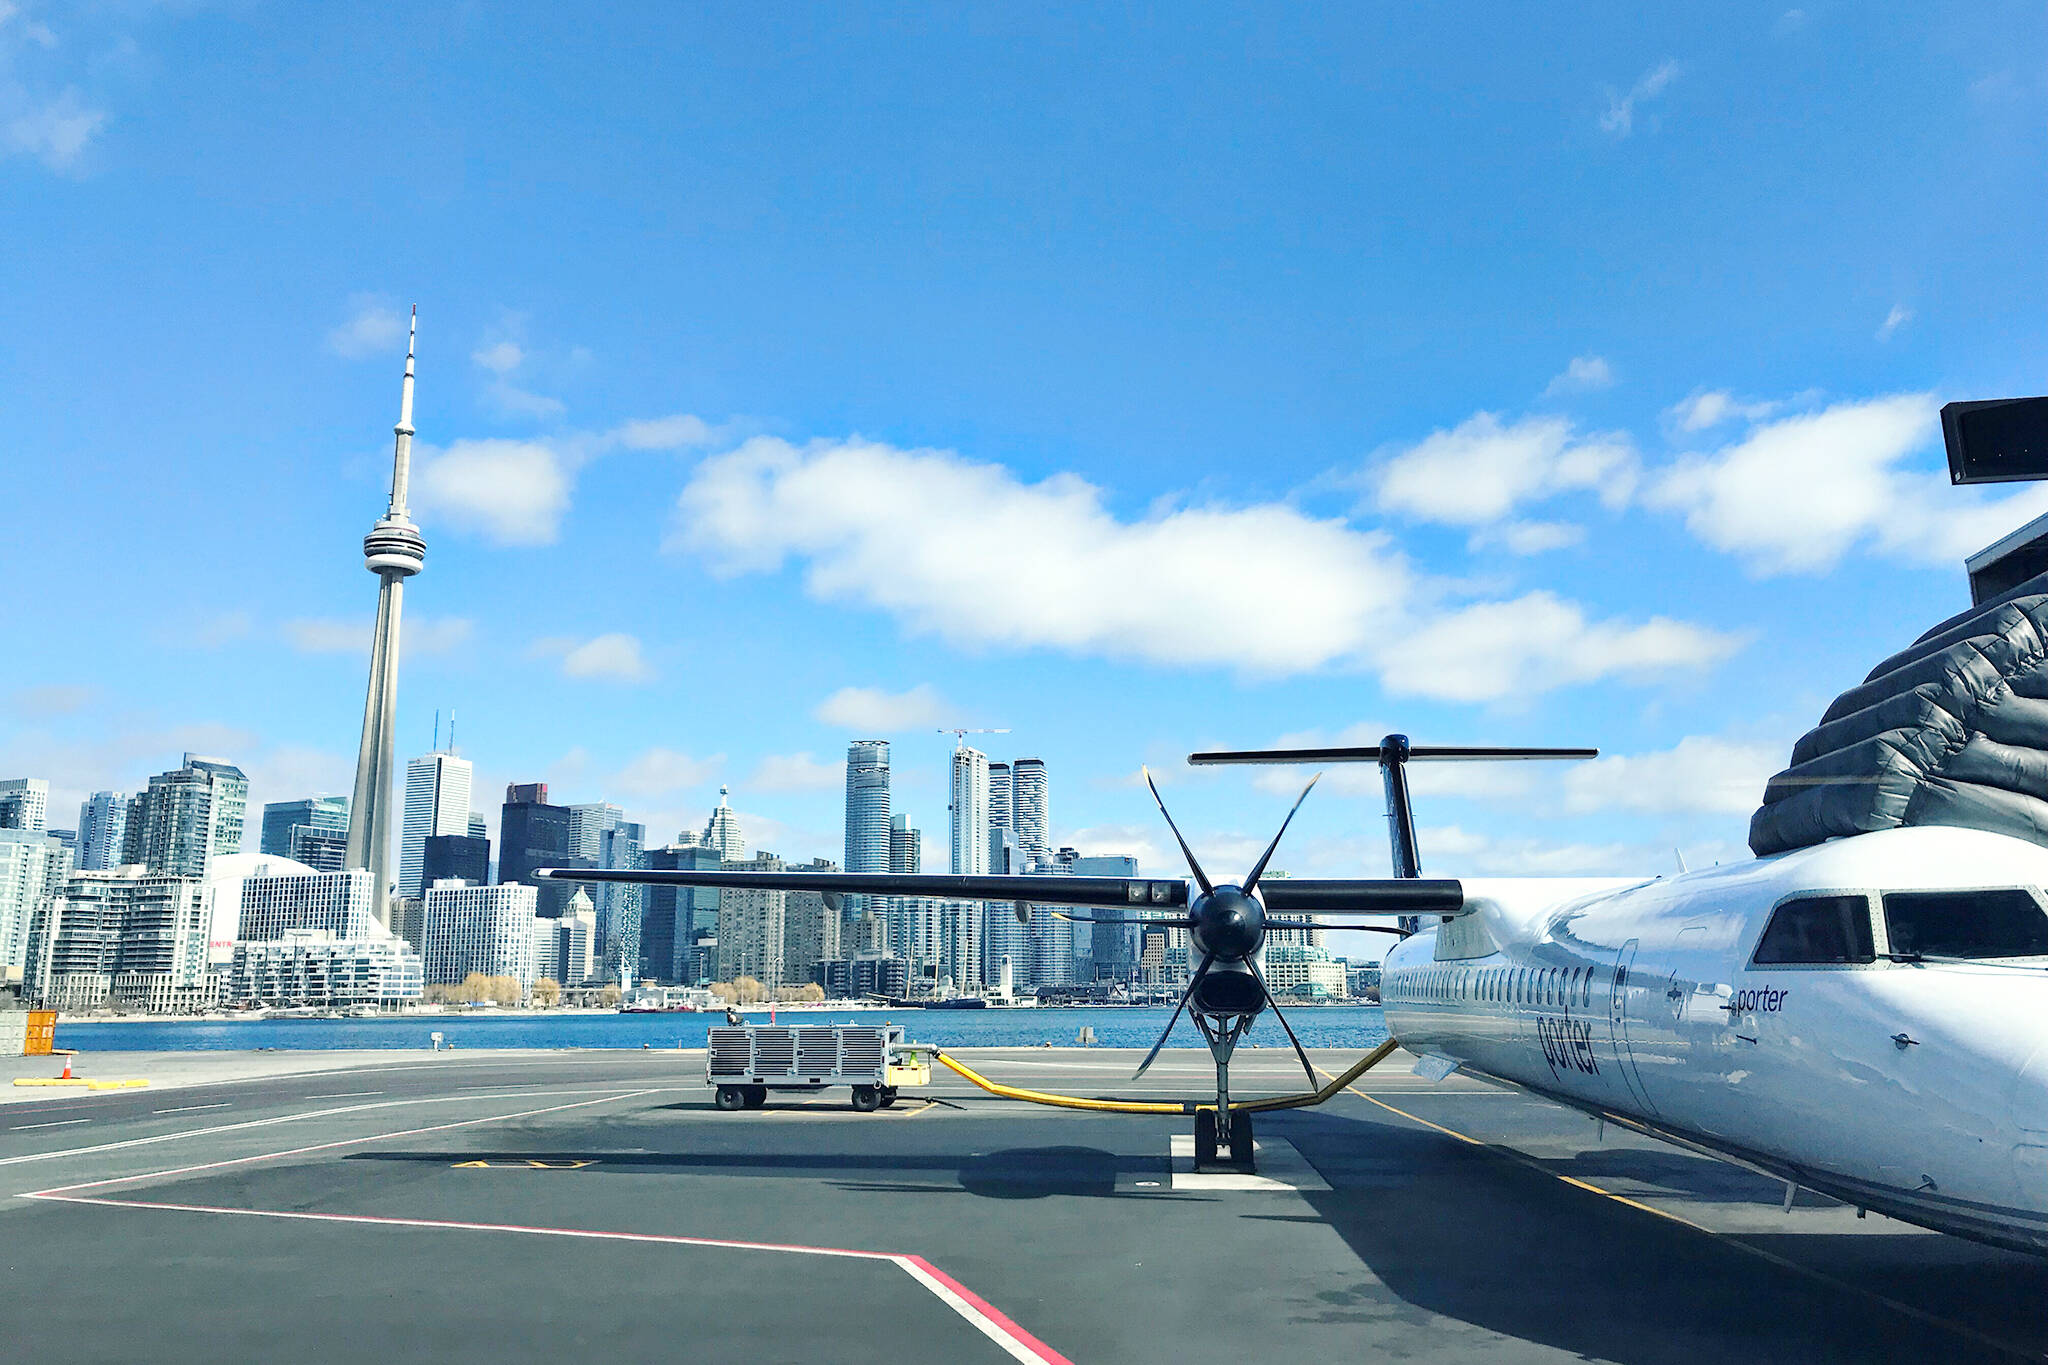 Billy Bishop Airport Toronto Preclearance Facility